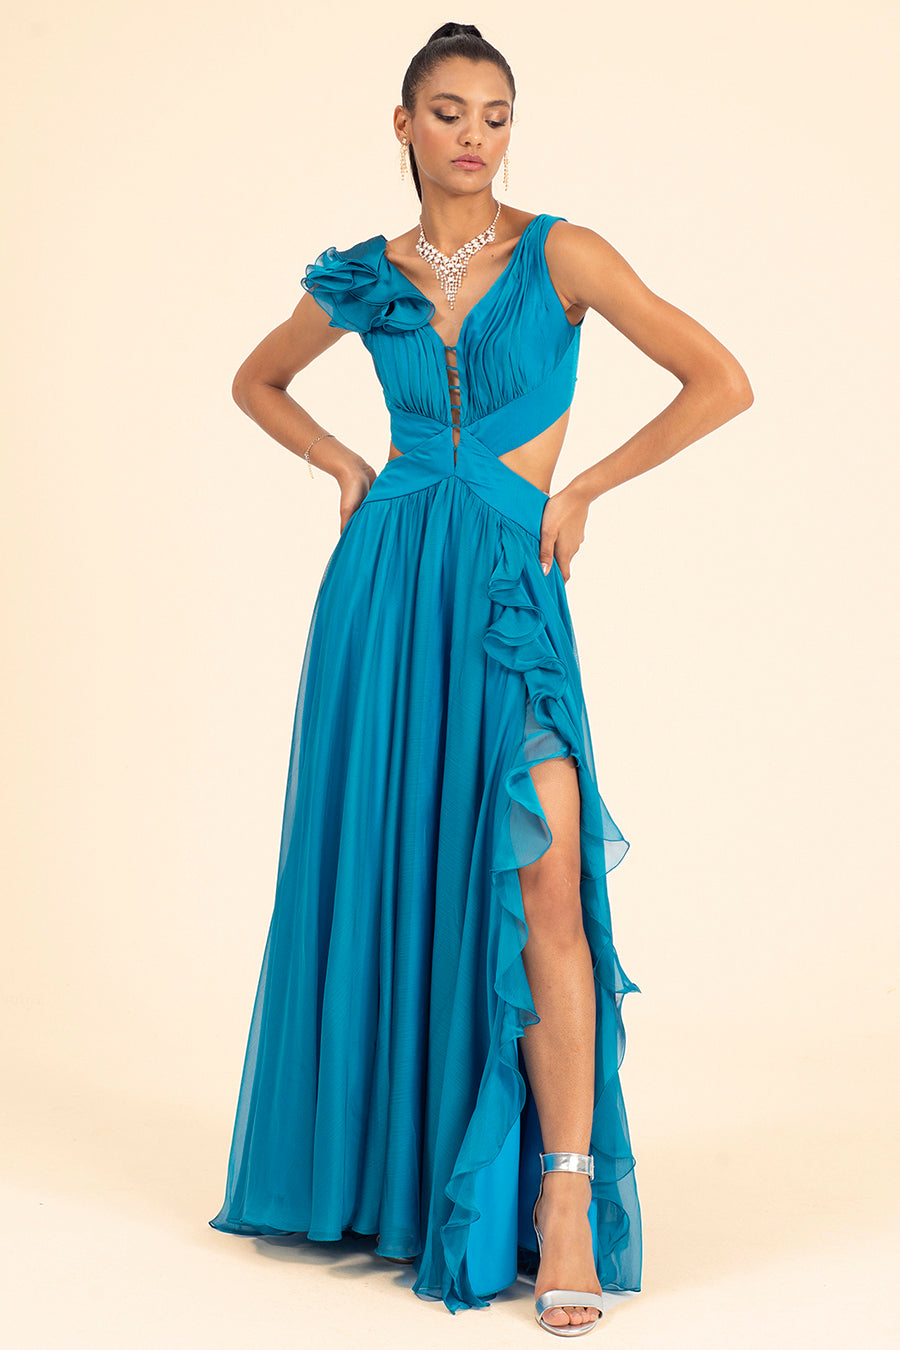 Rayan - Mystic Evenings | Evening and Prom Dresses